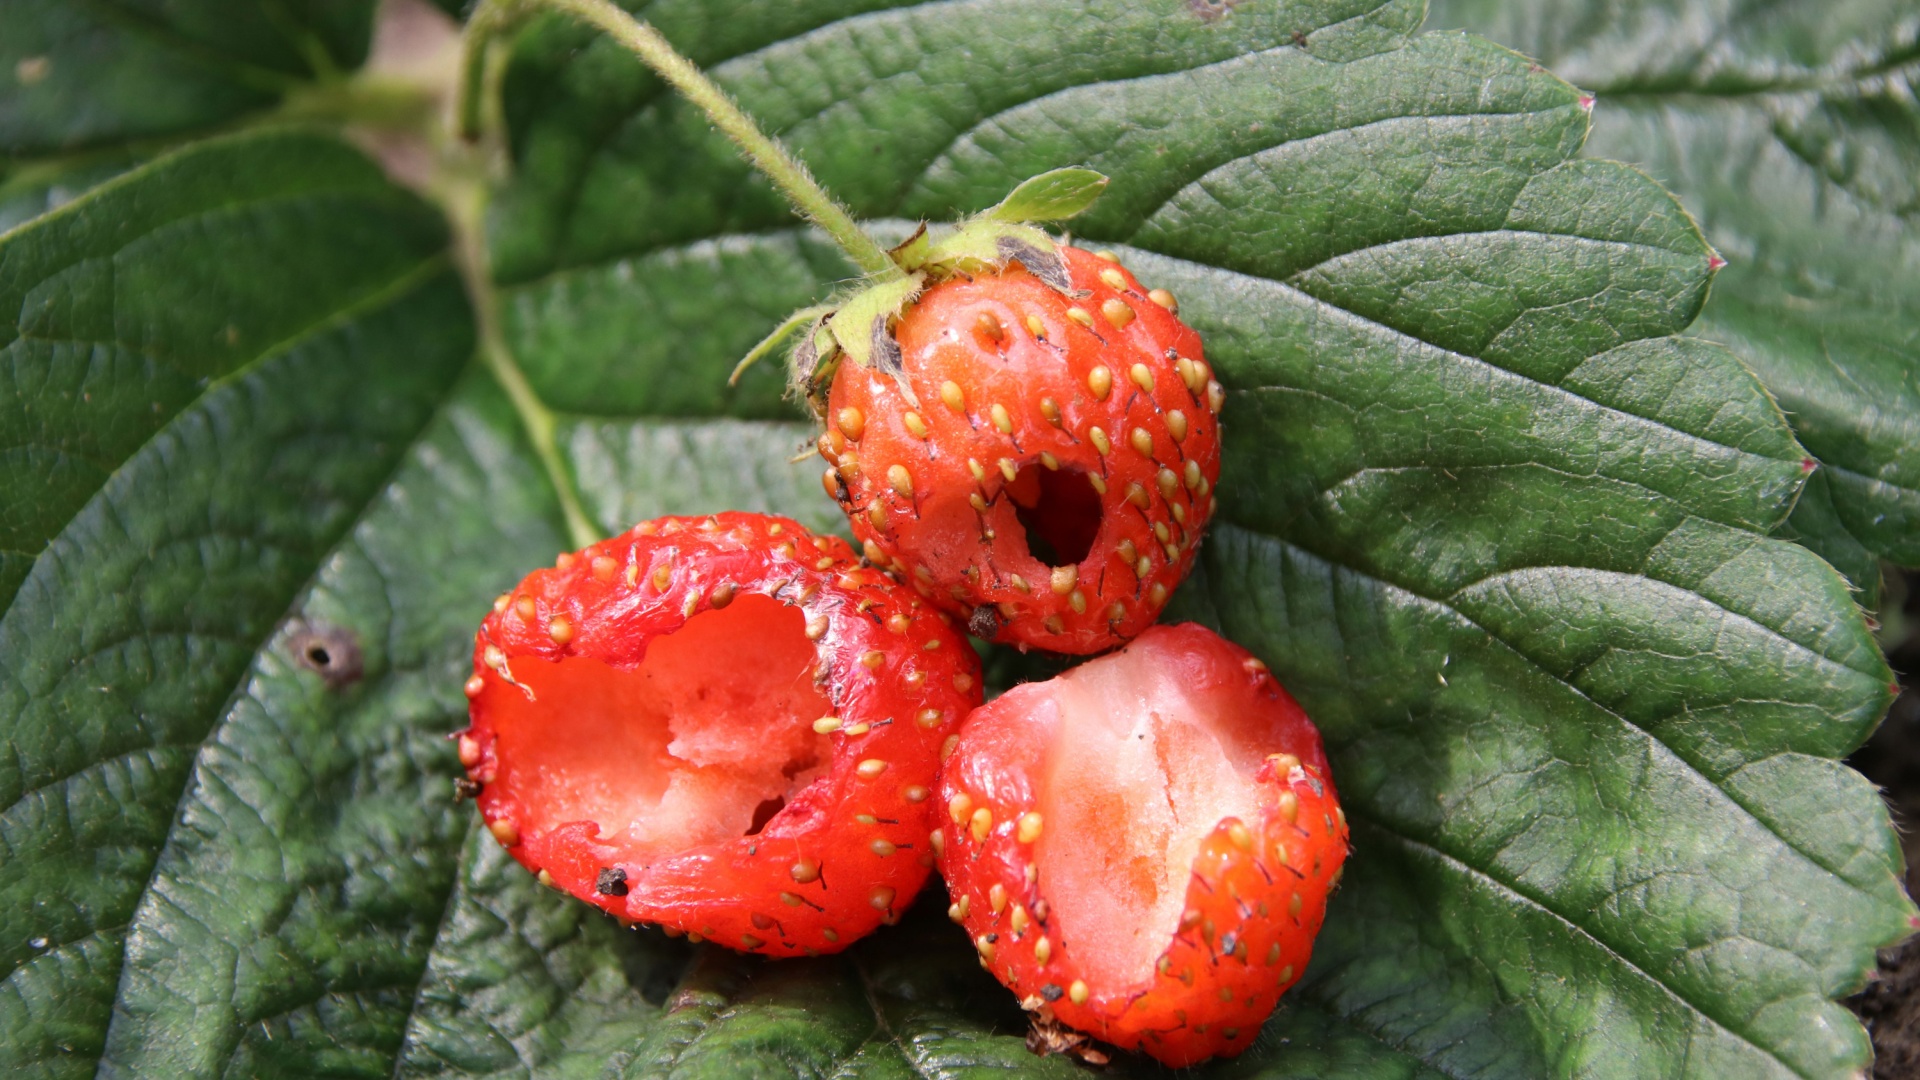 Strawberry damaged by pests